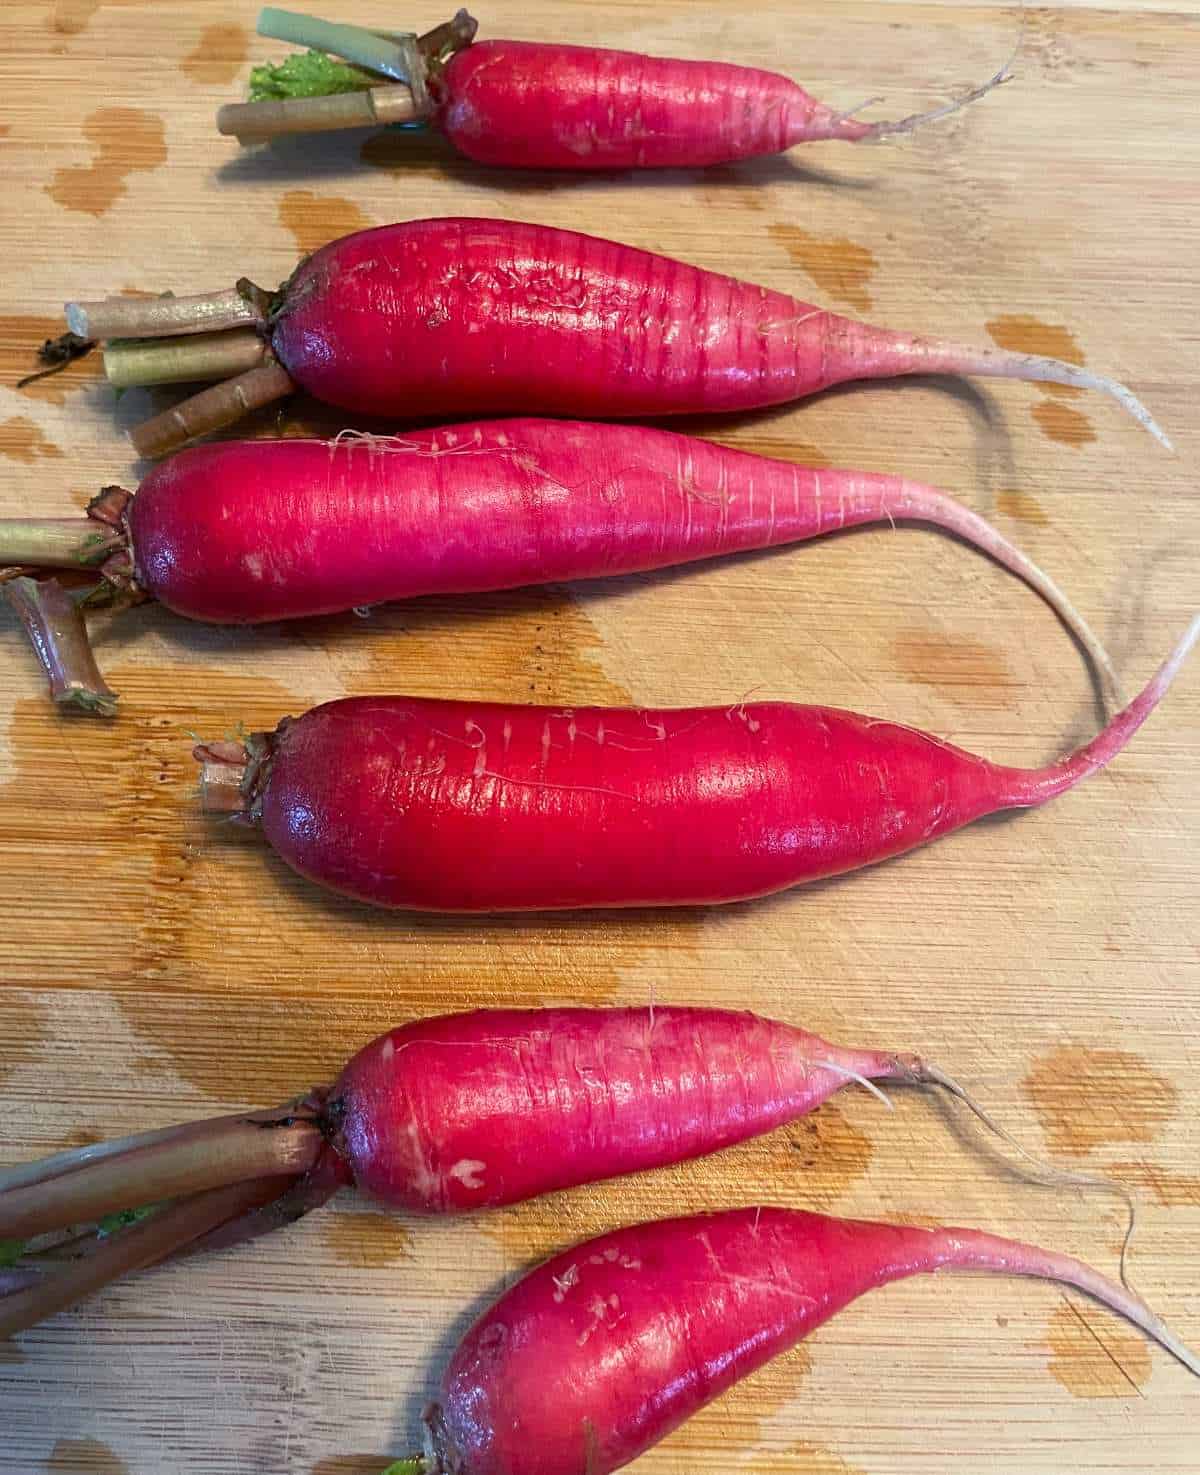 Red radishes on a cutting board after cleaning them.